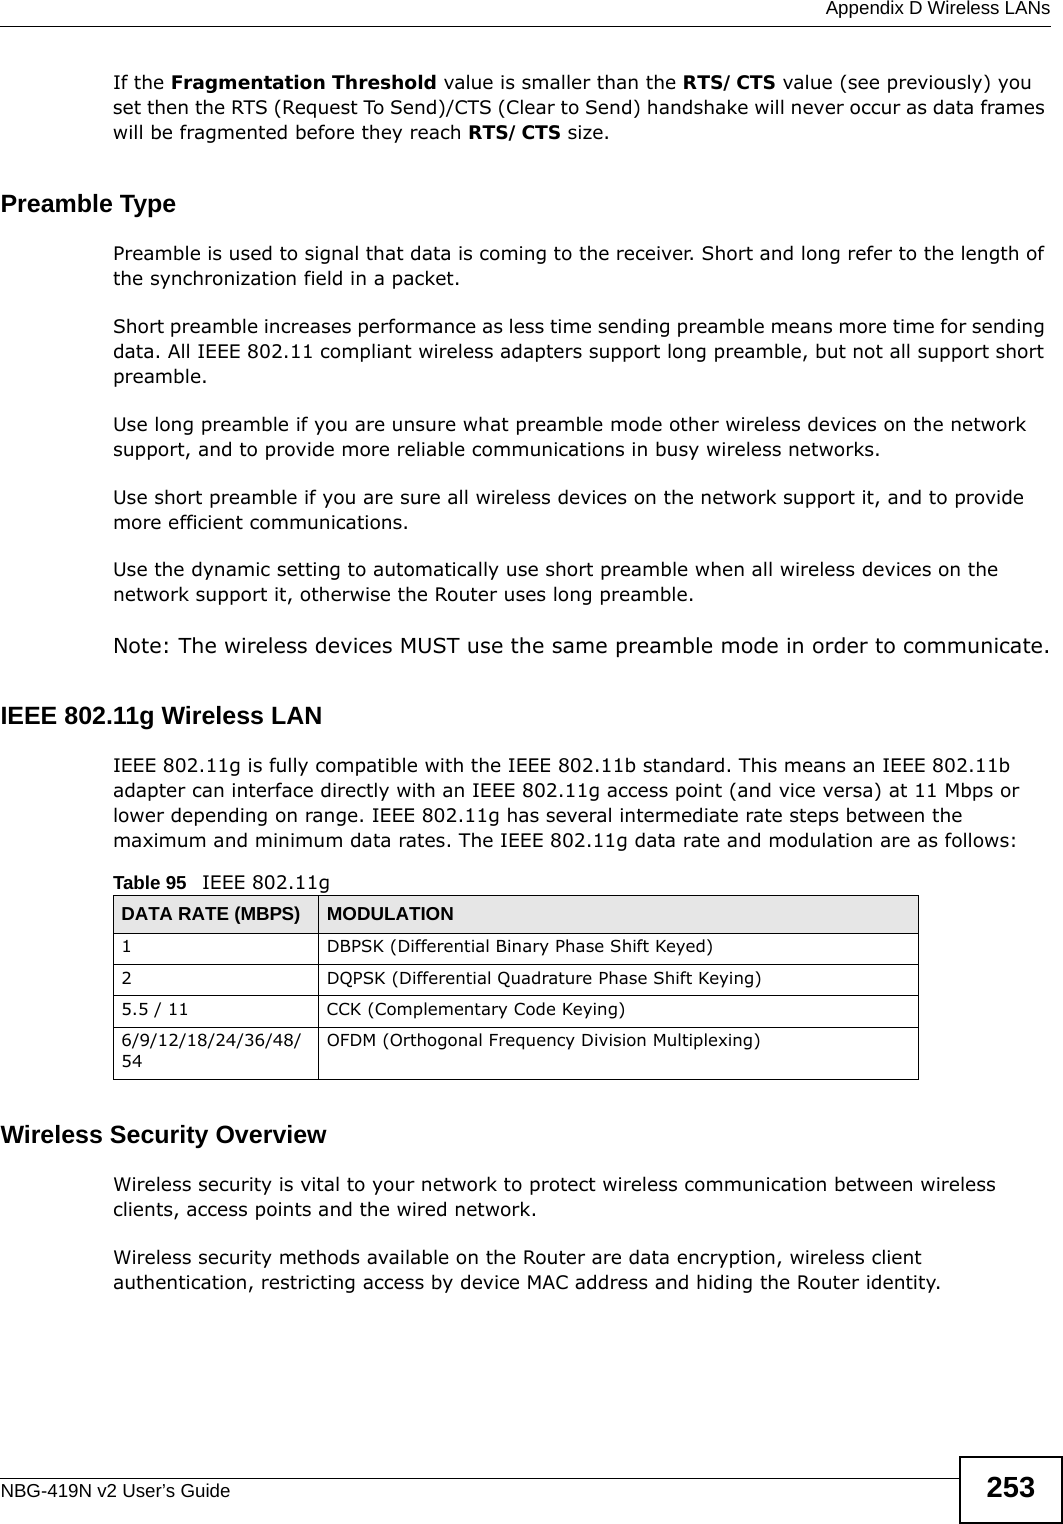  Appendix D Wireless LANsNBG-419N v2 User’s Guide 253If the Fragmentation Threshold value is smaller than the RTS/CTS value (see previously) you set then the RTS (Request To Send)/CTS (Clear to Send) handshake will never occur as data frames will be fragmented before they reach RTS/CTS size.Preamble TypePreamble is used to signal that data is coming to the receiver. Short and long refer to the length of the synchronization field in a packet.Short preamble increases performance as less time sending preamble means more time for sending data. All IEEE 802.11 compliant wireless adapters support long preamble, but not all support short preamble. Use long preamble if you are unsure what preamble mode other wireless devices on the network support, and to provide more reliable communications in busy wireless networks. Use short preamble if you are sure all wireless devices on the network support it, and to provide more efficient communications.Use the dynamic setting to automatically use short preamble when all wireless devices on the network support it, otherwise the Router uses long preamble.Note: The wireless devices MUST use the same preamble mode in order to communicate.IEEE 802.11g Wireless LANIEEE 802.11g is fully compatible with the IEEE 802.11b standard. This means an IEEE 802.11b adapter can interface directly with an IEEE 802.11g access point (and vice versa) at 11 Mbps or lower depending on range. IEEE 802.11g has several intermediate rate steps between the maximum and minimum data rates. The IEEE 802.11g data rate and modulation are as follows:Wireless Security OverviewWireless security is vital to your network to protect wireless communication between wireless clients, access points and the wired network.Wireless security methods available on the Router are data encryption, wireless client authentication, restricting access by device MAC address and hiding the Router identity.Table 95   IEEE 802.11gDATA RATE (MBPS) MODULATION1 DBPSK (Differential Binary Phase Shift Keyed)2 DQPSK (Differential Quadrature Phase Shift Keying)5.5 / 11 CCK (Complementary Code Keying) 6/9/12/18/24/36/48/54OFDM (Orthogonal Frequency Division Multiplexing) 